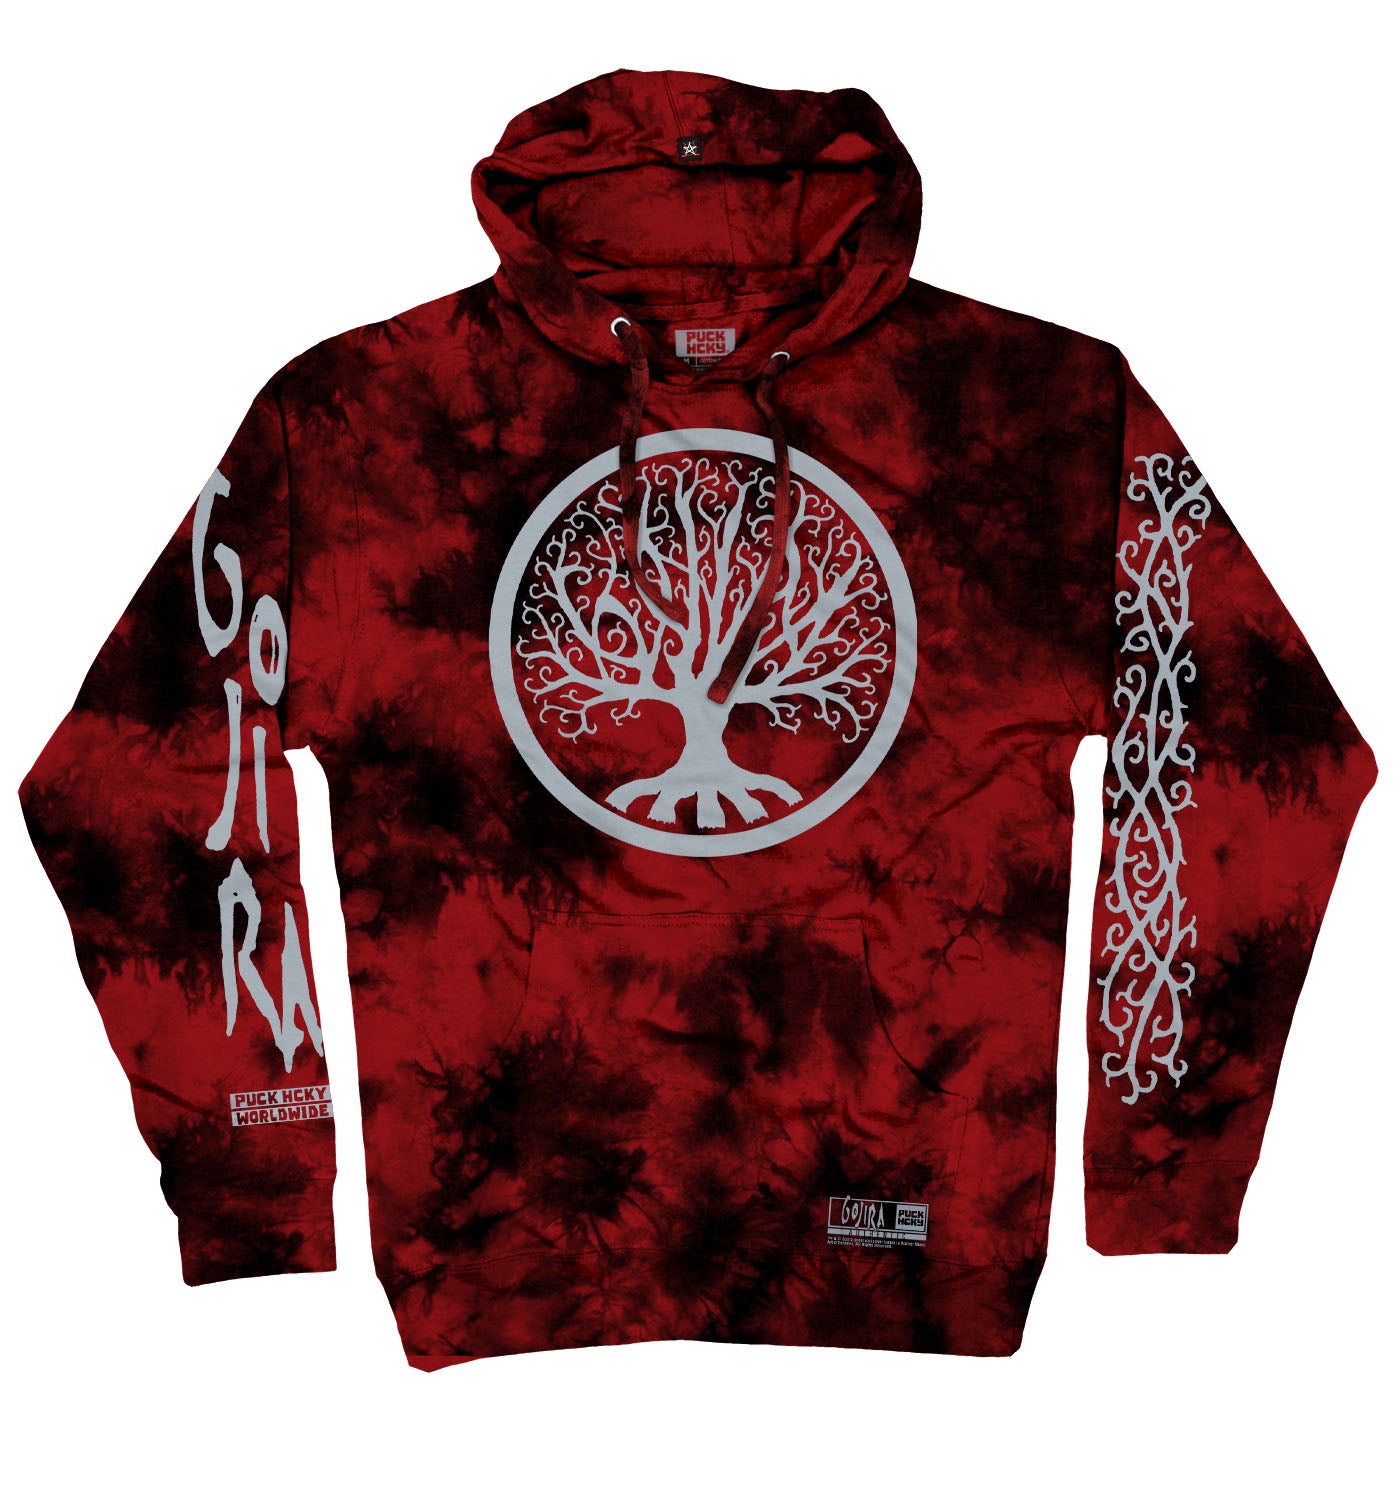 GOJIRA 'FROM THE TREES' pullover hockey hoodie in red and black tie-dye front view